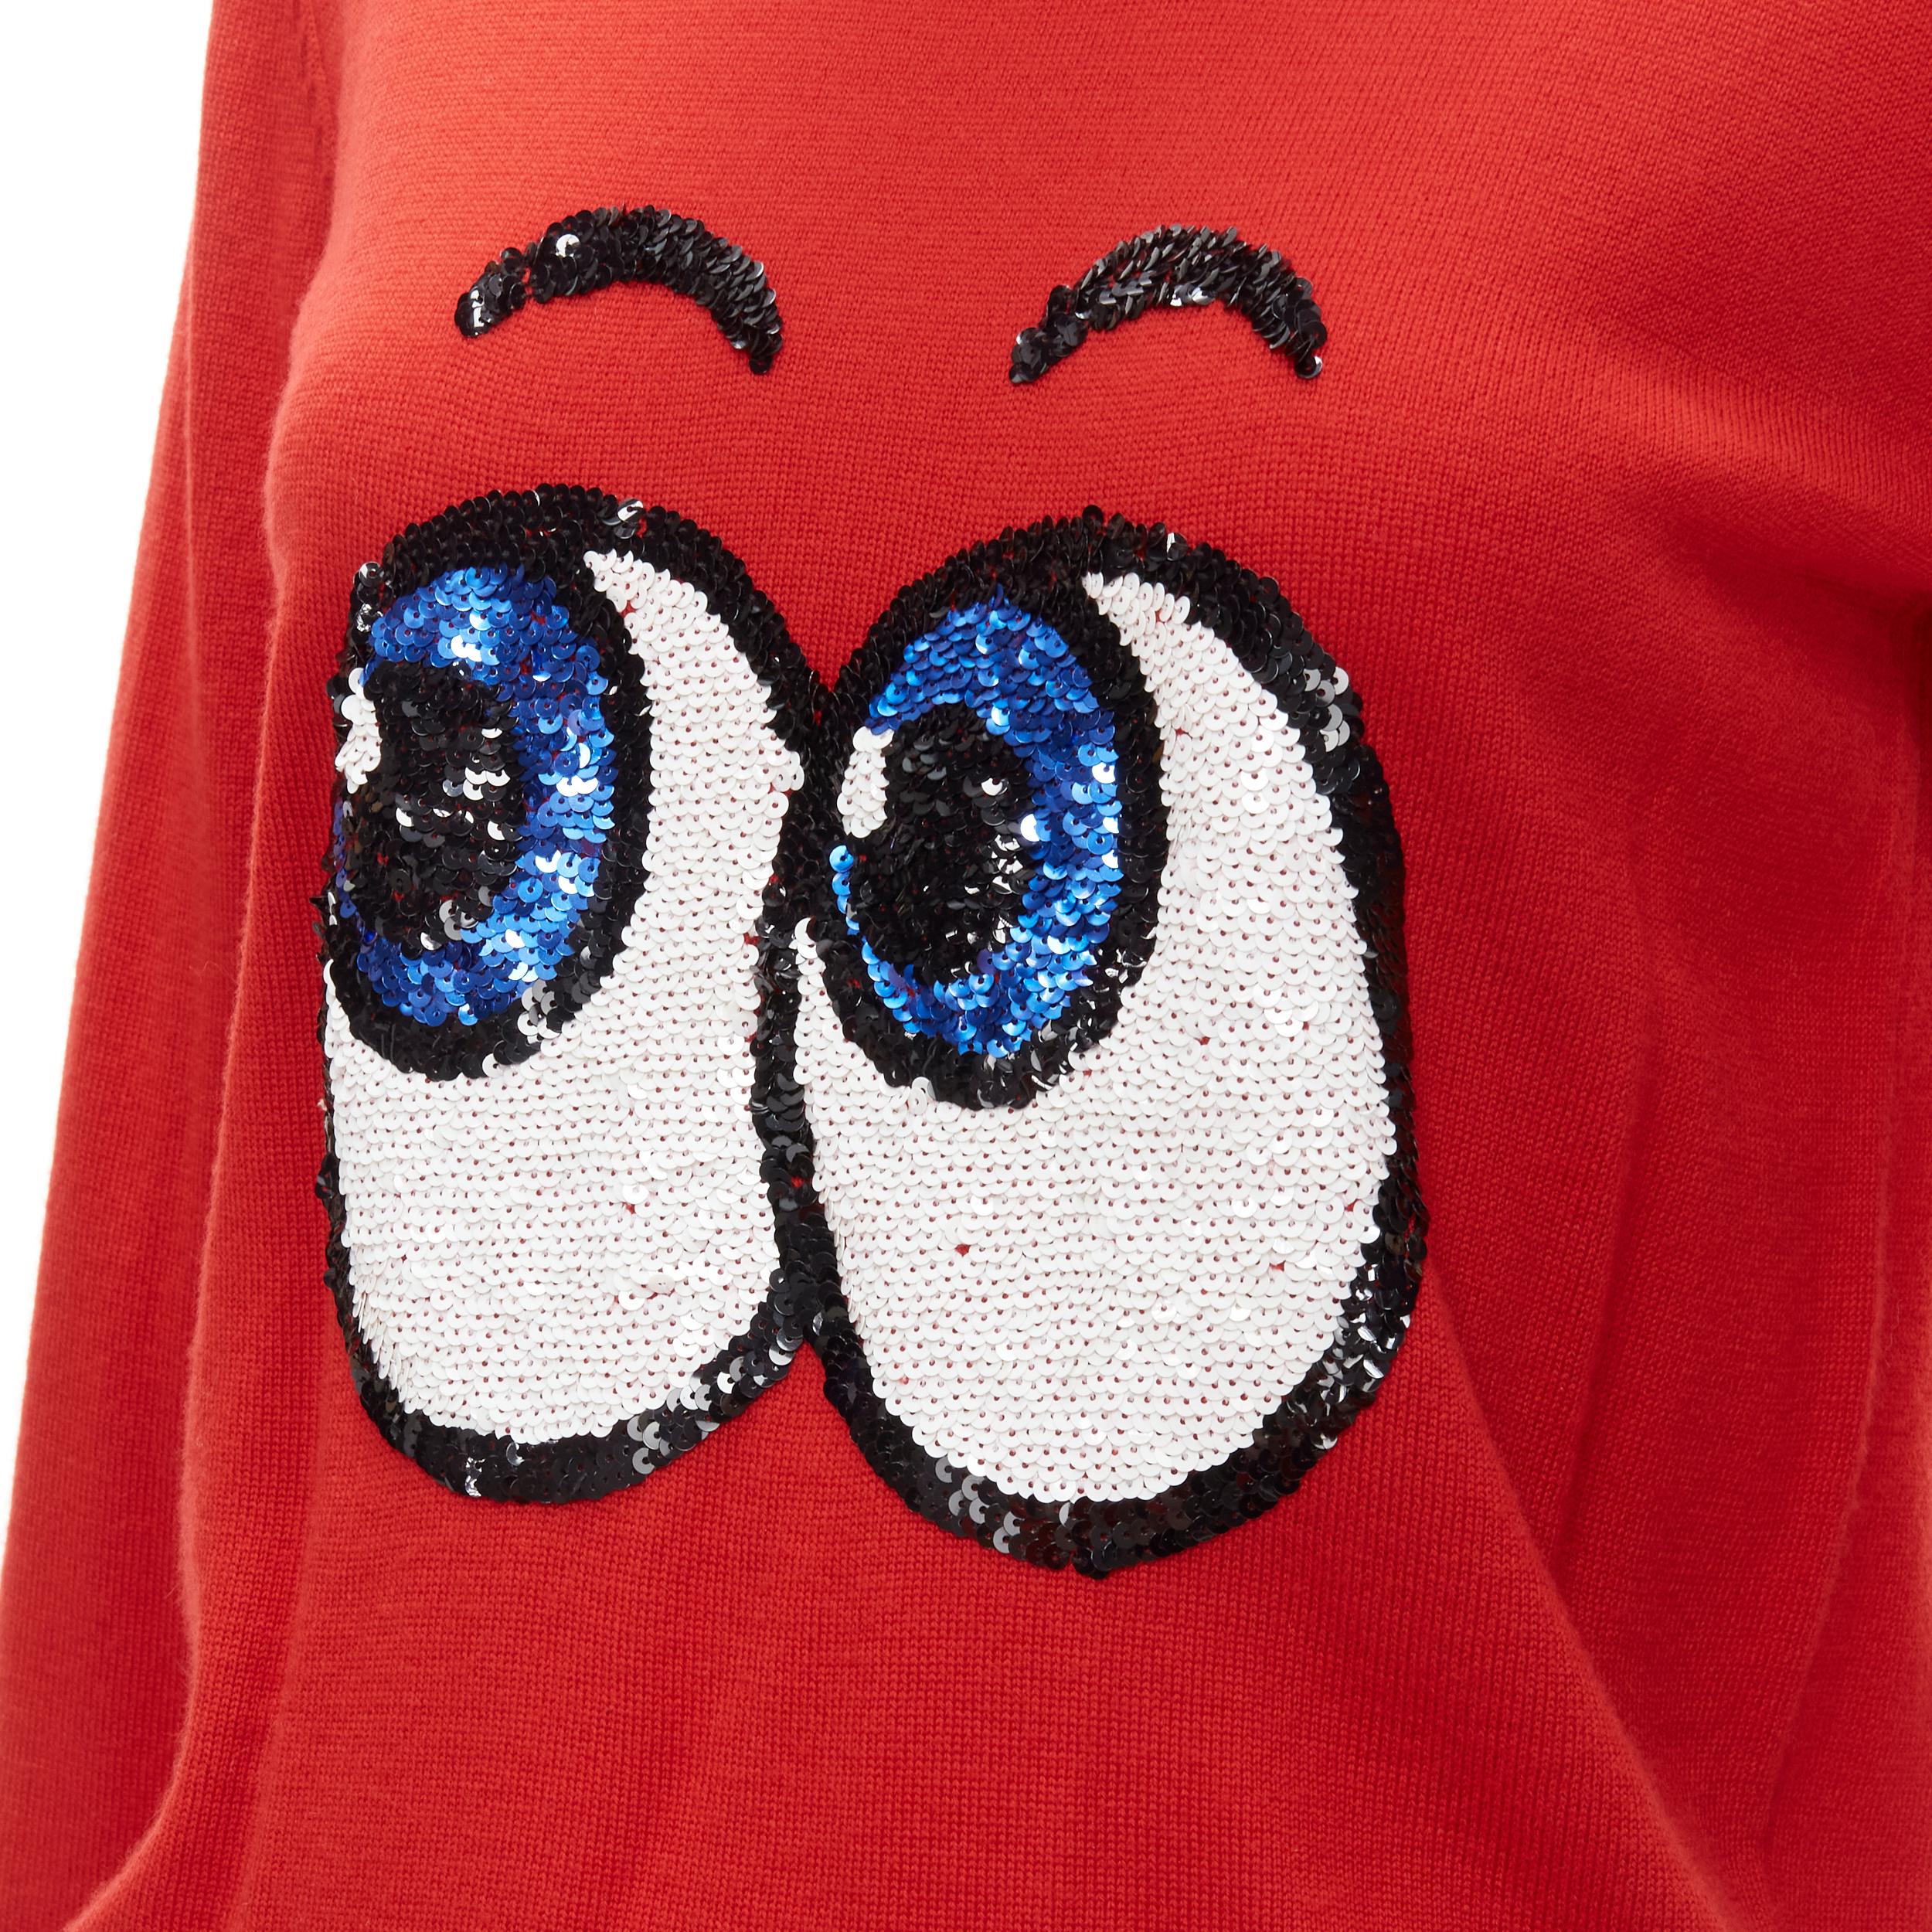 MARKUS LUPFER comic eyes sequins red pullover sweater XS
Brand: Markus Lupfer
Material: Feels like wool
Color: Red
Pattern: Solid

CONDITION:
Condition: Excellent, this item was pre-owned and is in excellent condition. Composition label